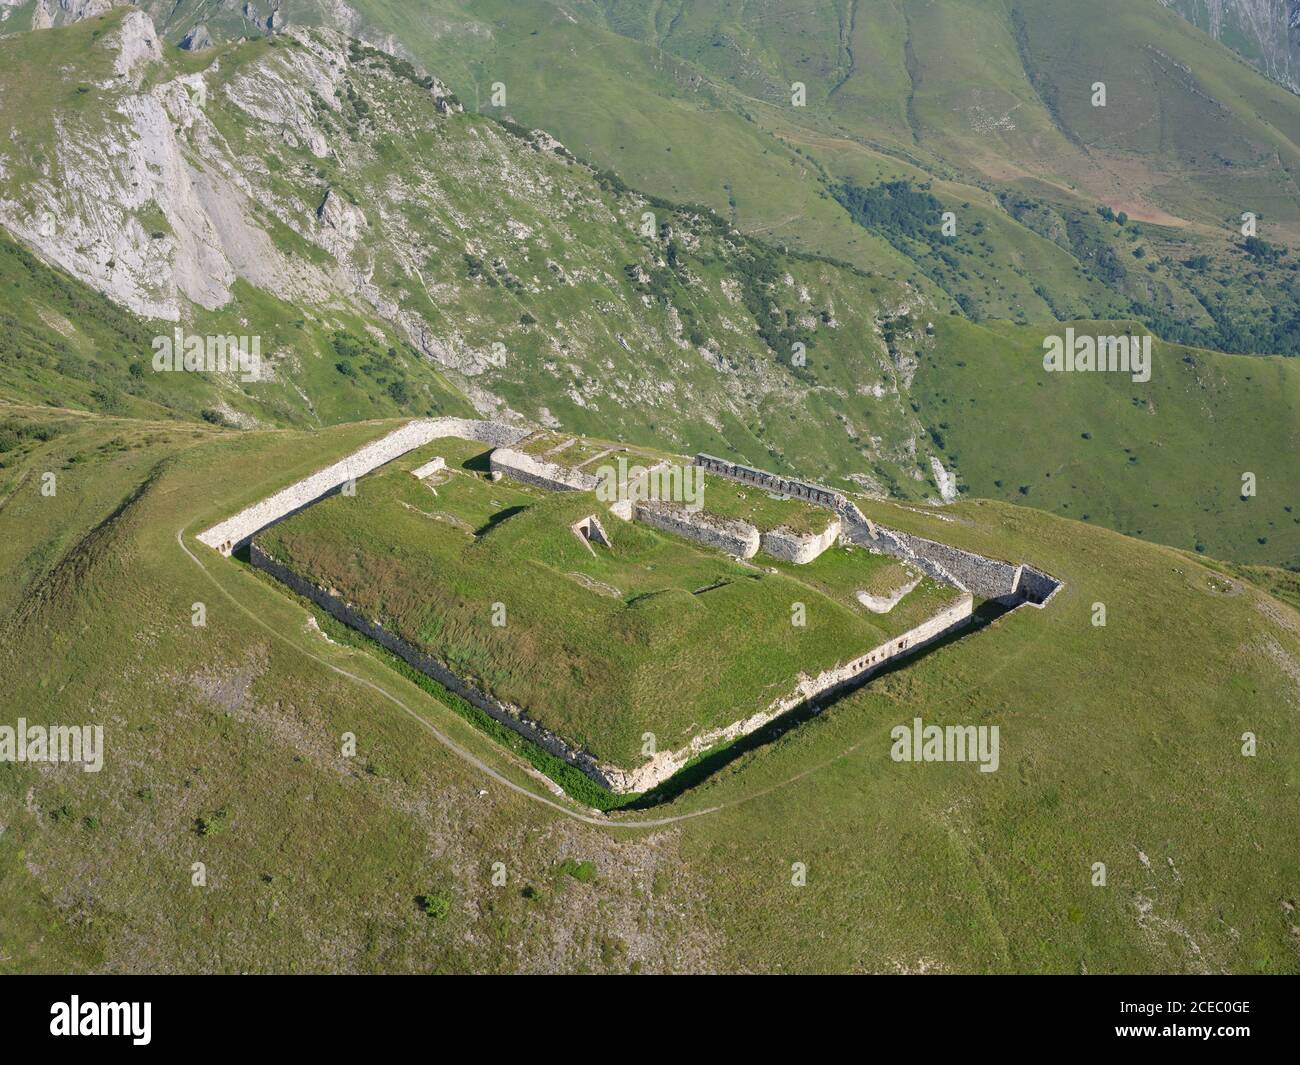 AERIAL VIEW. Fort Pernante, an old military fortification above Col de Tende. Tende, Alpes-Maritimes, France. Stock Photo